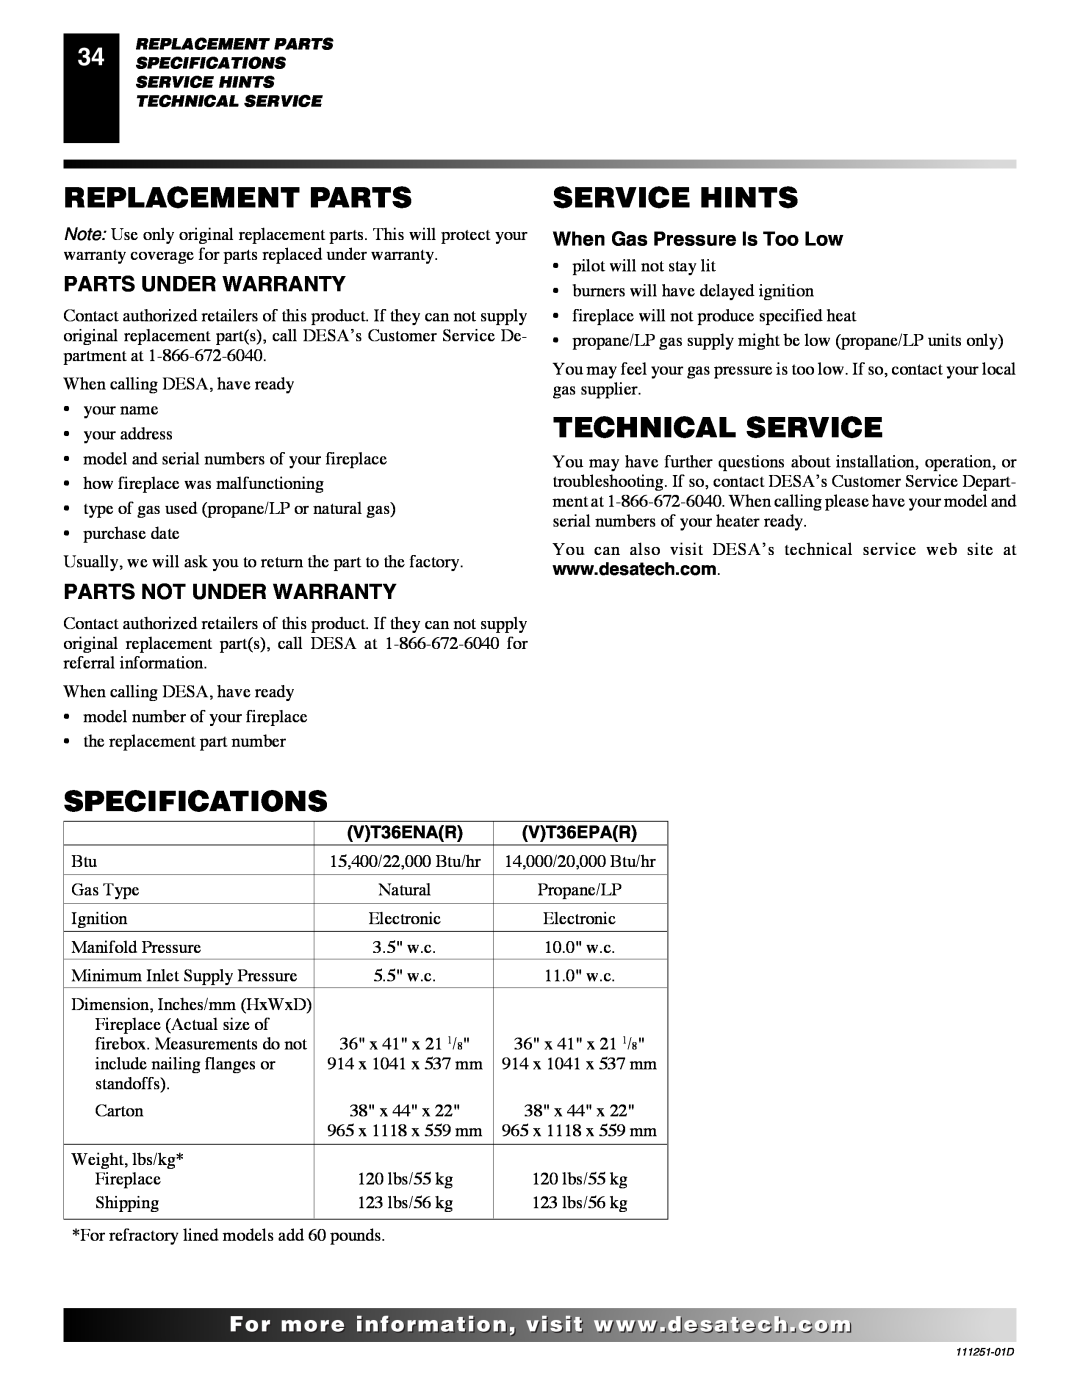 Desa (V)T36EPA SERIES, (V)T36ENA SERIES Replacement Parts, Service Hints, Technical Service, Specifications 